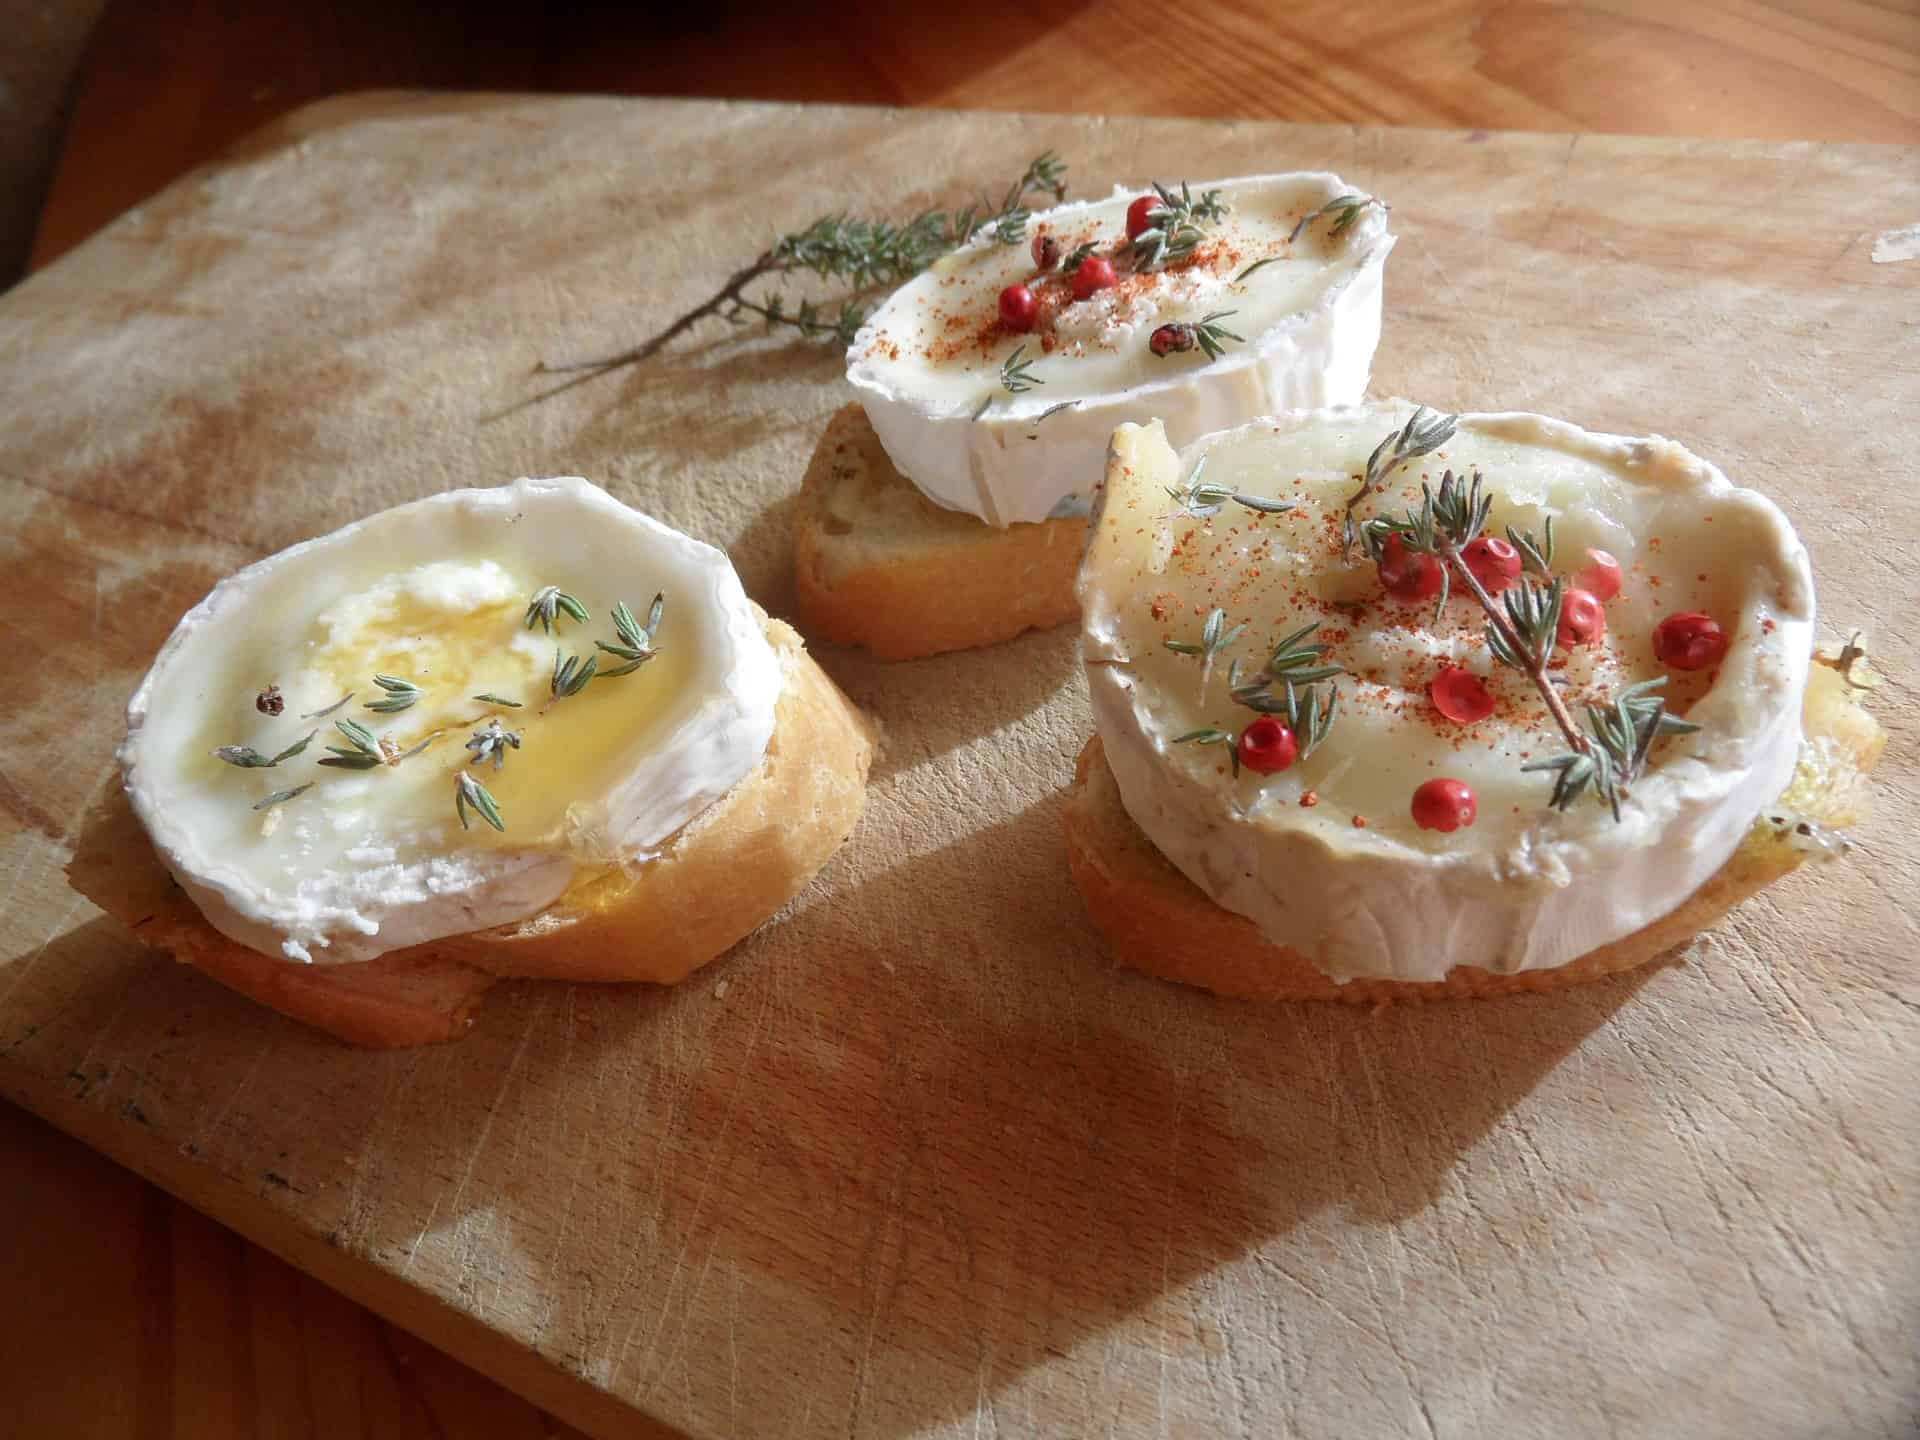 goat cheese on small pieces of bread and displayed on a wooden serving platter